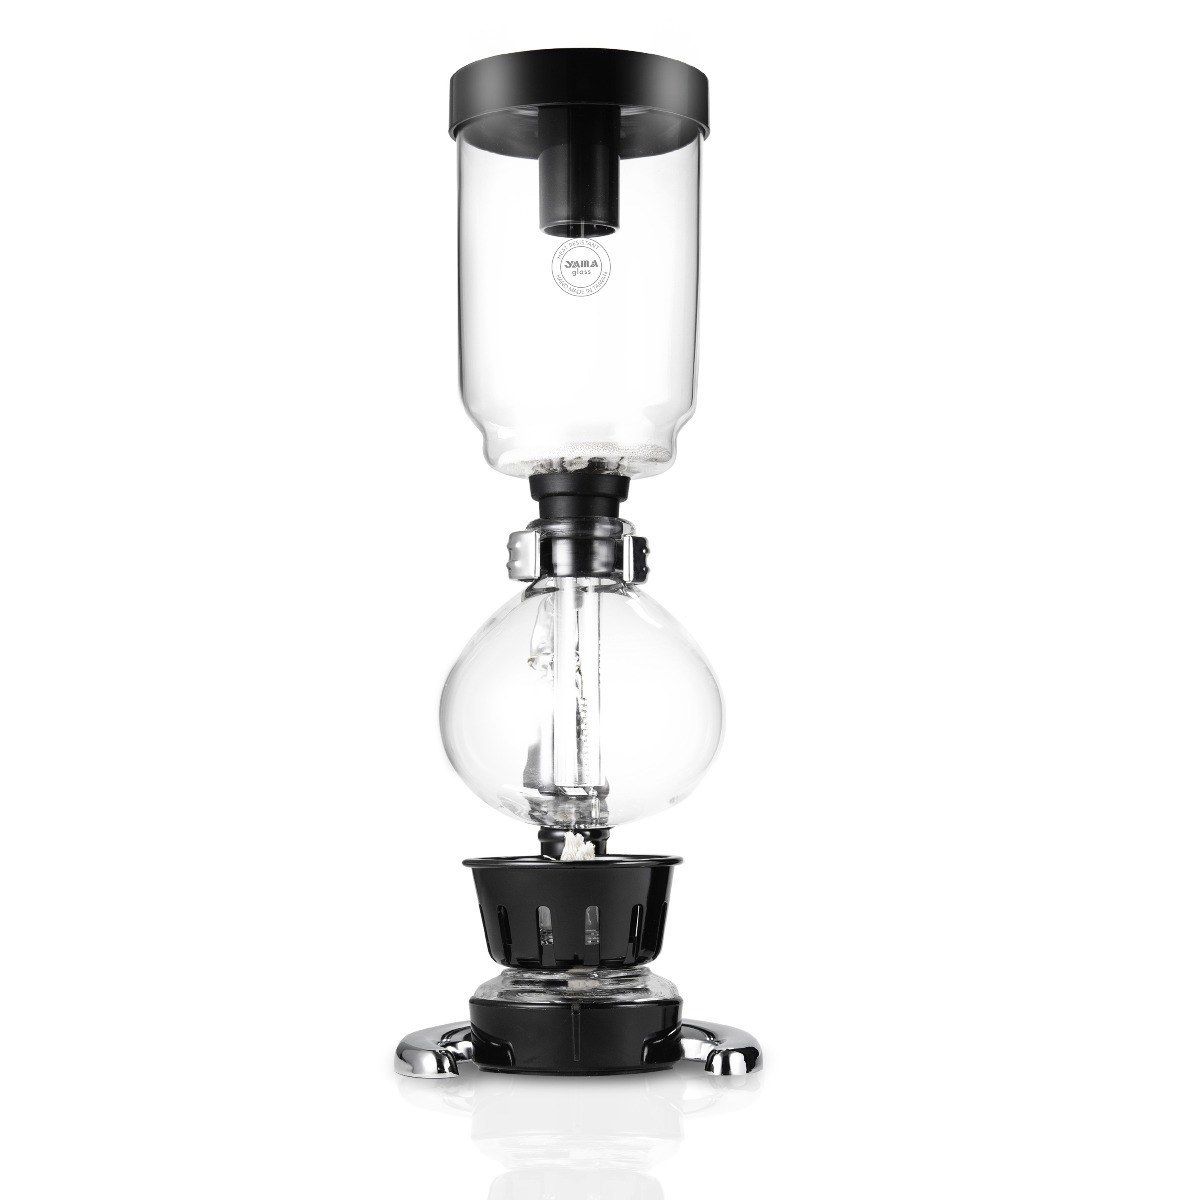 Yama Glass Tabletop Siphon Coffee Maker I Syphon Brewer with Vacuum  Technology I Hand Blown Durable Borosilicate Glass for Cleanest Brew I  Alcohol